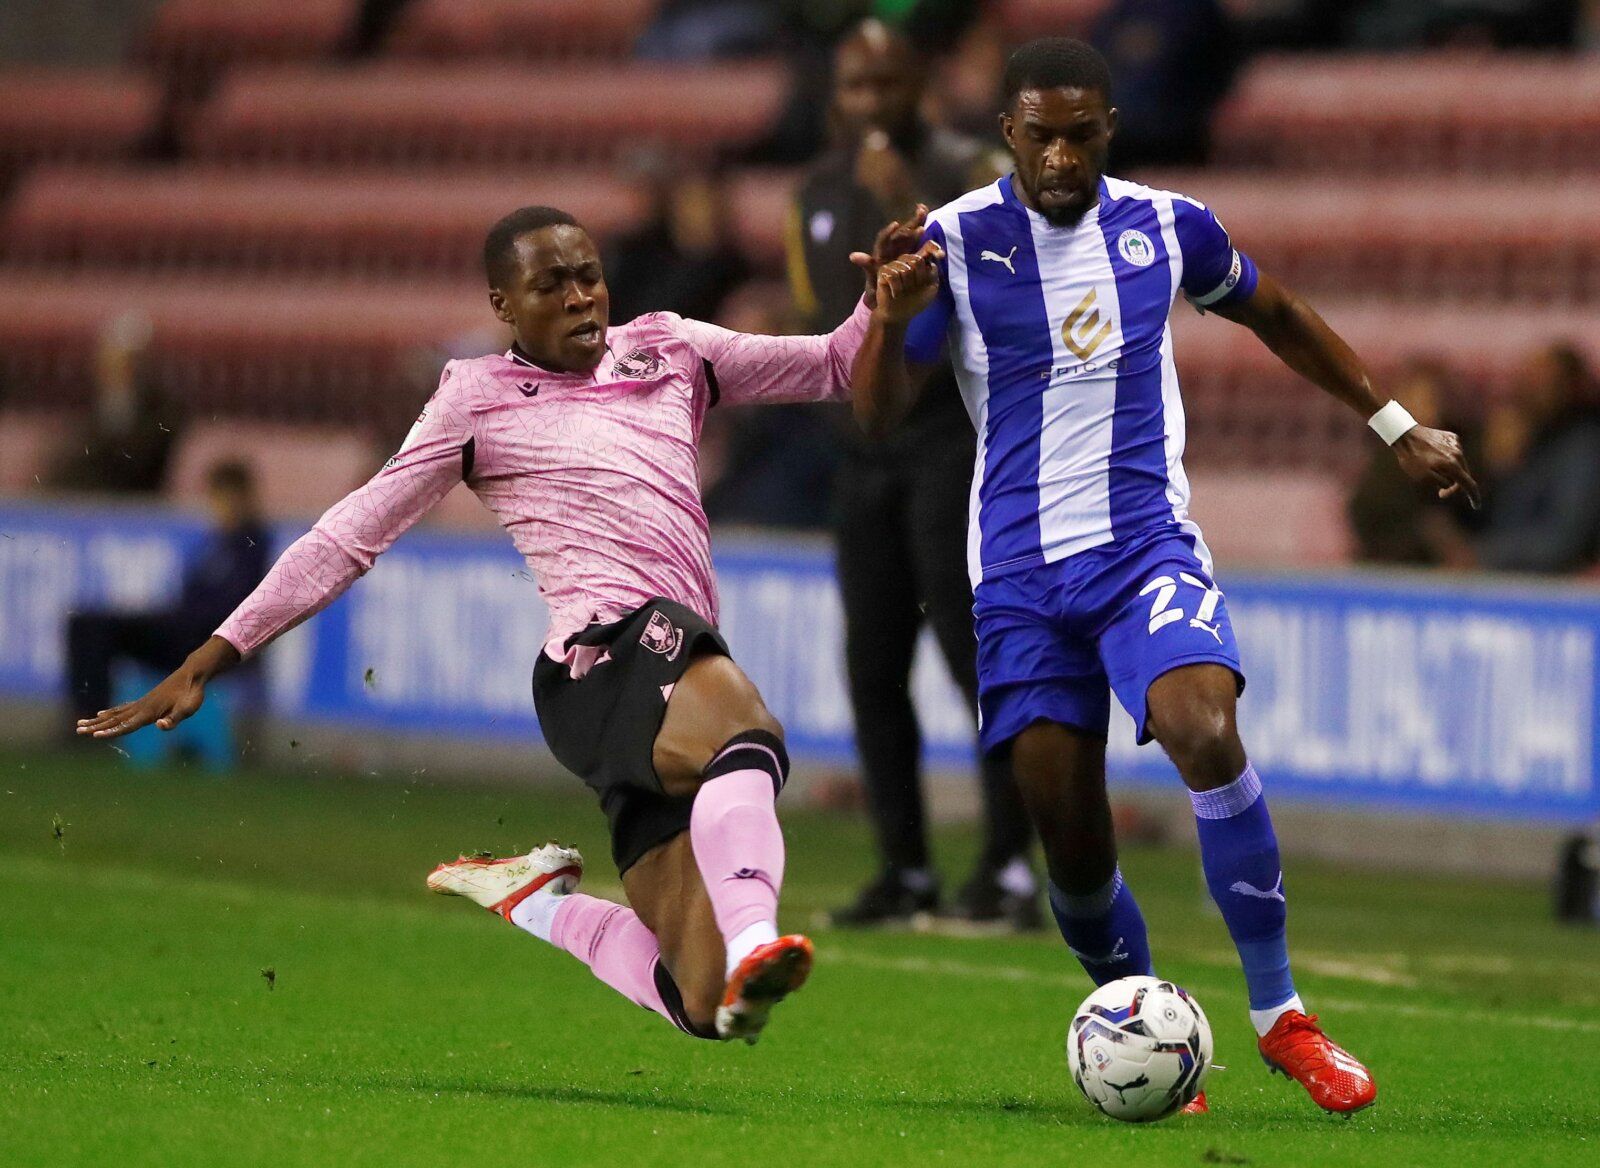 Soccer Football - League One - Wigan Athletic v Sheffield Wednesday - DW Stadium, Wigan, Britain - September 28, 2021 Sheffield Wednesday's Dennis Adeniran in action with Wigan Athletic's Tendayi Darikwa   Action Images/Jason Cairnduff  EDITORIAL USE ONLY. No use with unauthorized audio, video, data, fixture lists, club/league logos or "live" services. Online in-match use limited to 75 images, no video emulation. No use in betting, games or single club/league/player publications.  Please contact